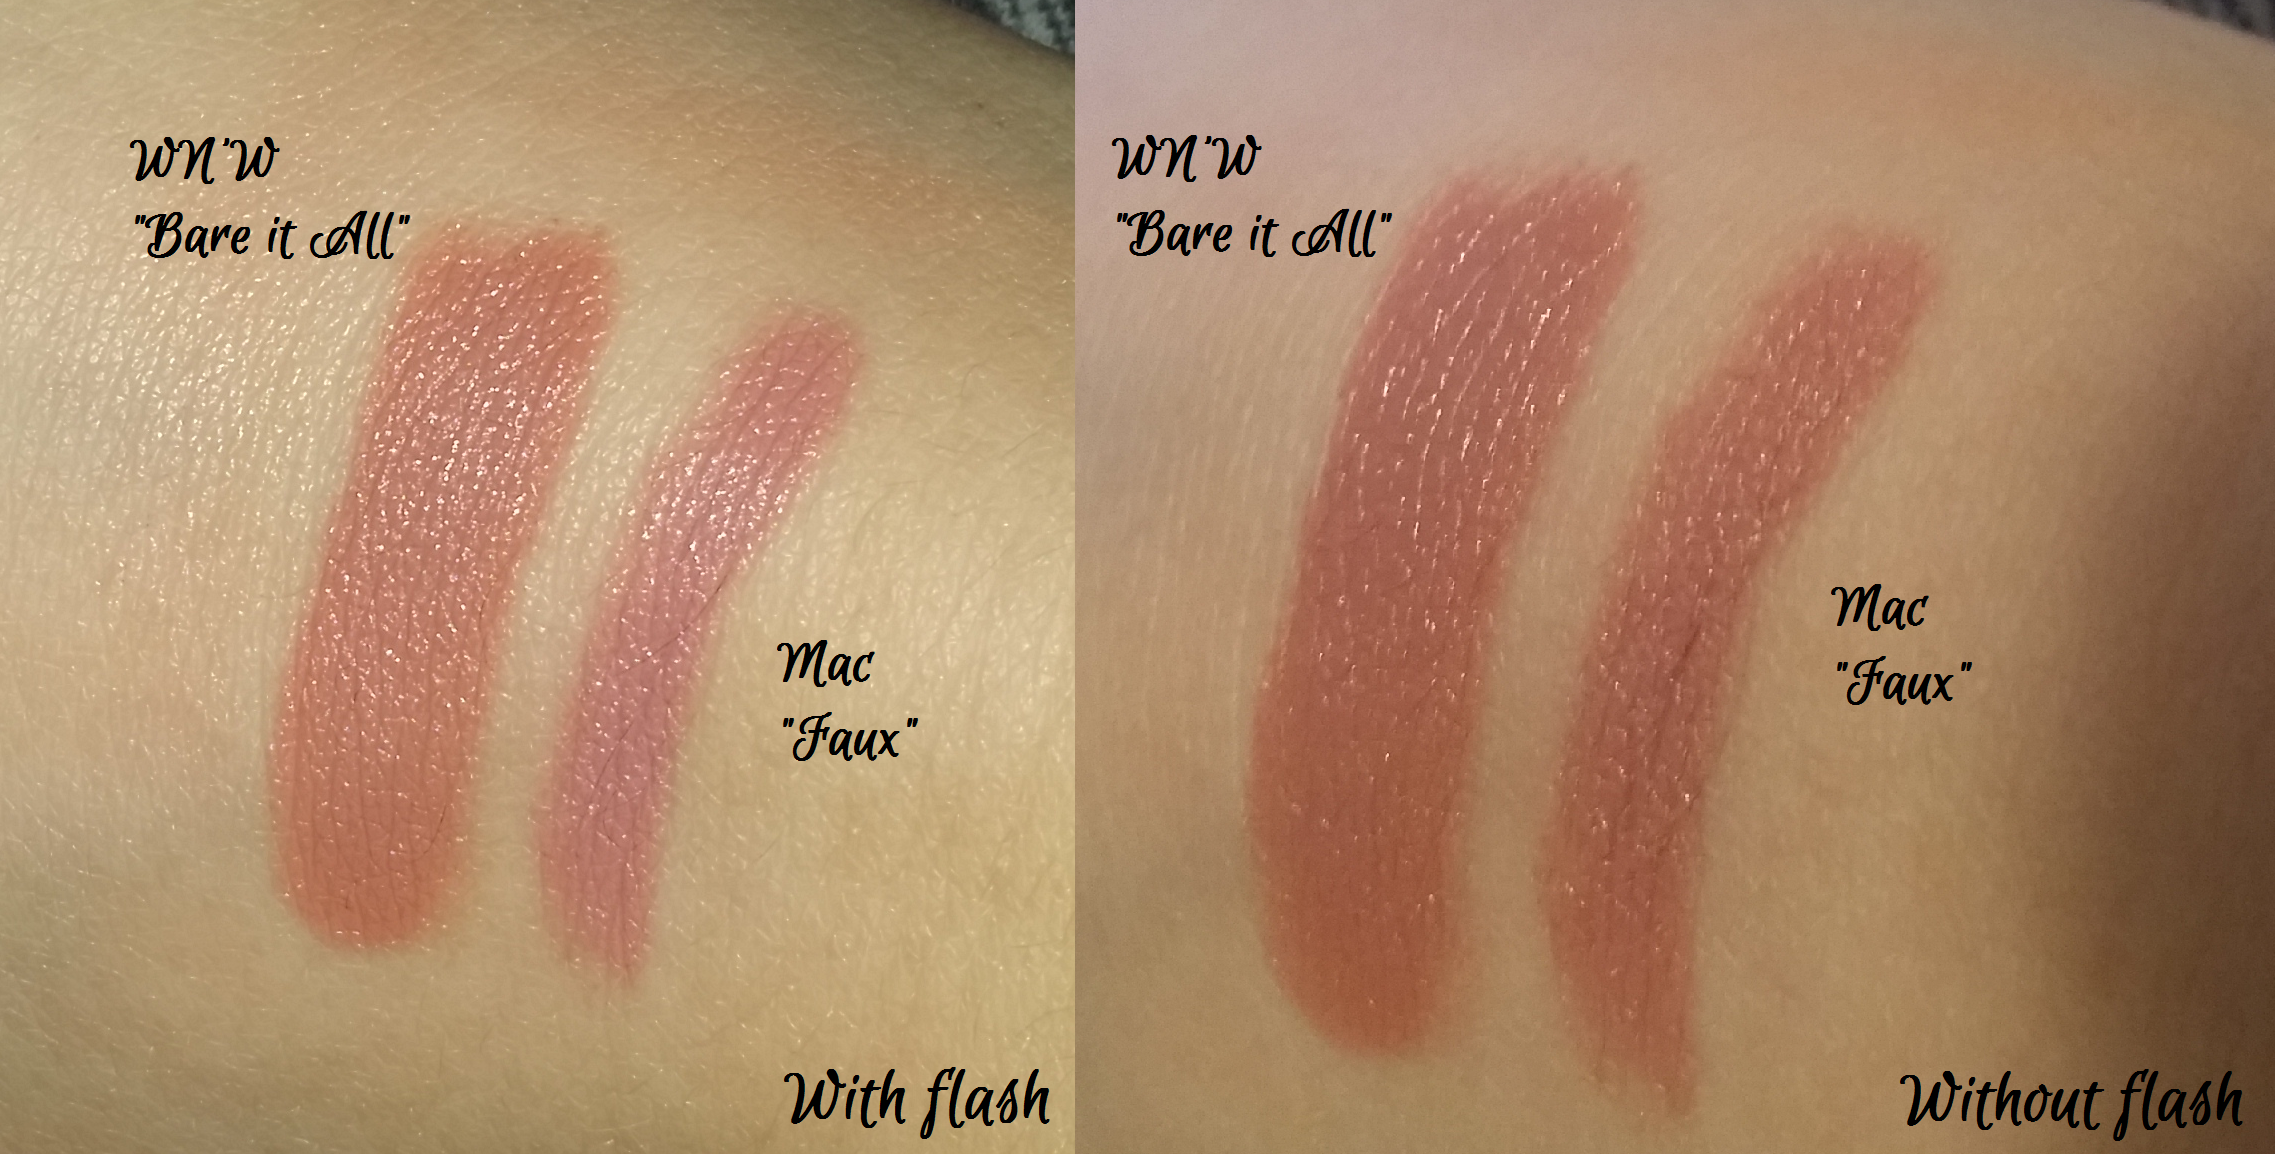 wet n wild bare it all dupe